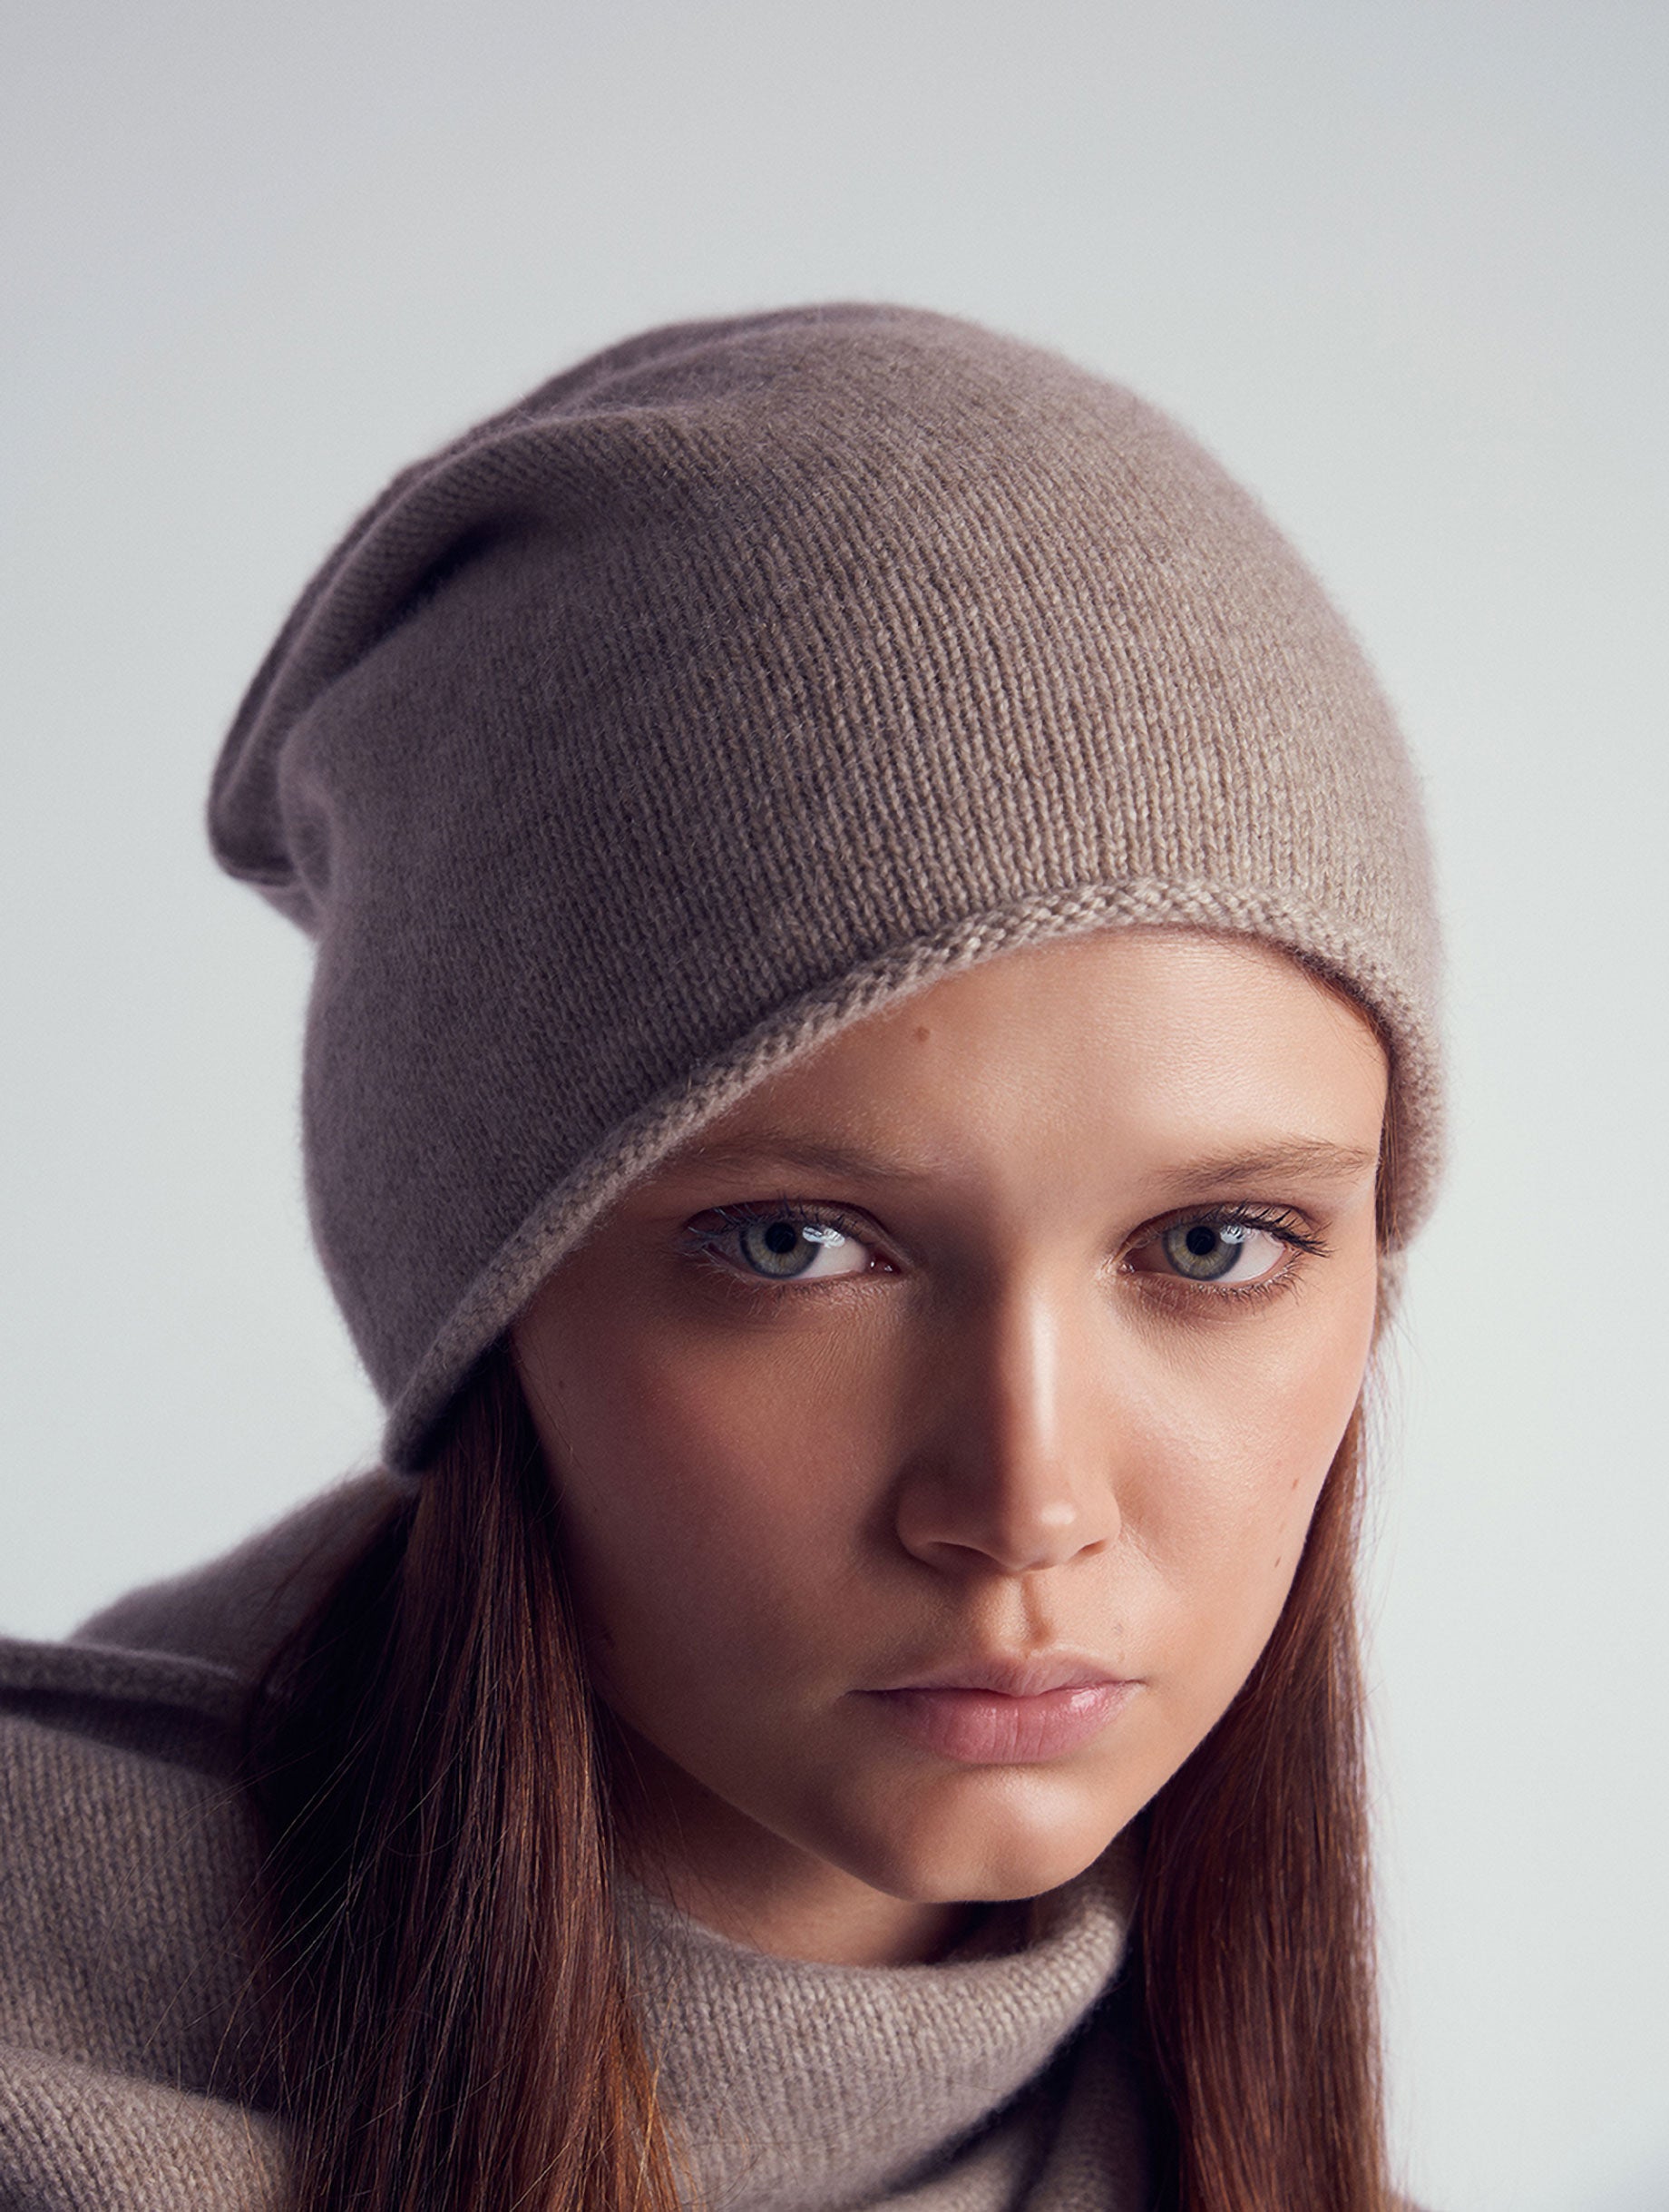 CATA Cashmere knitted beanie hat